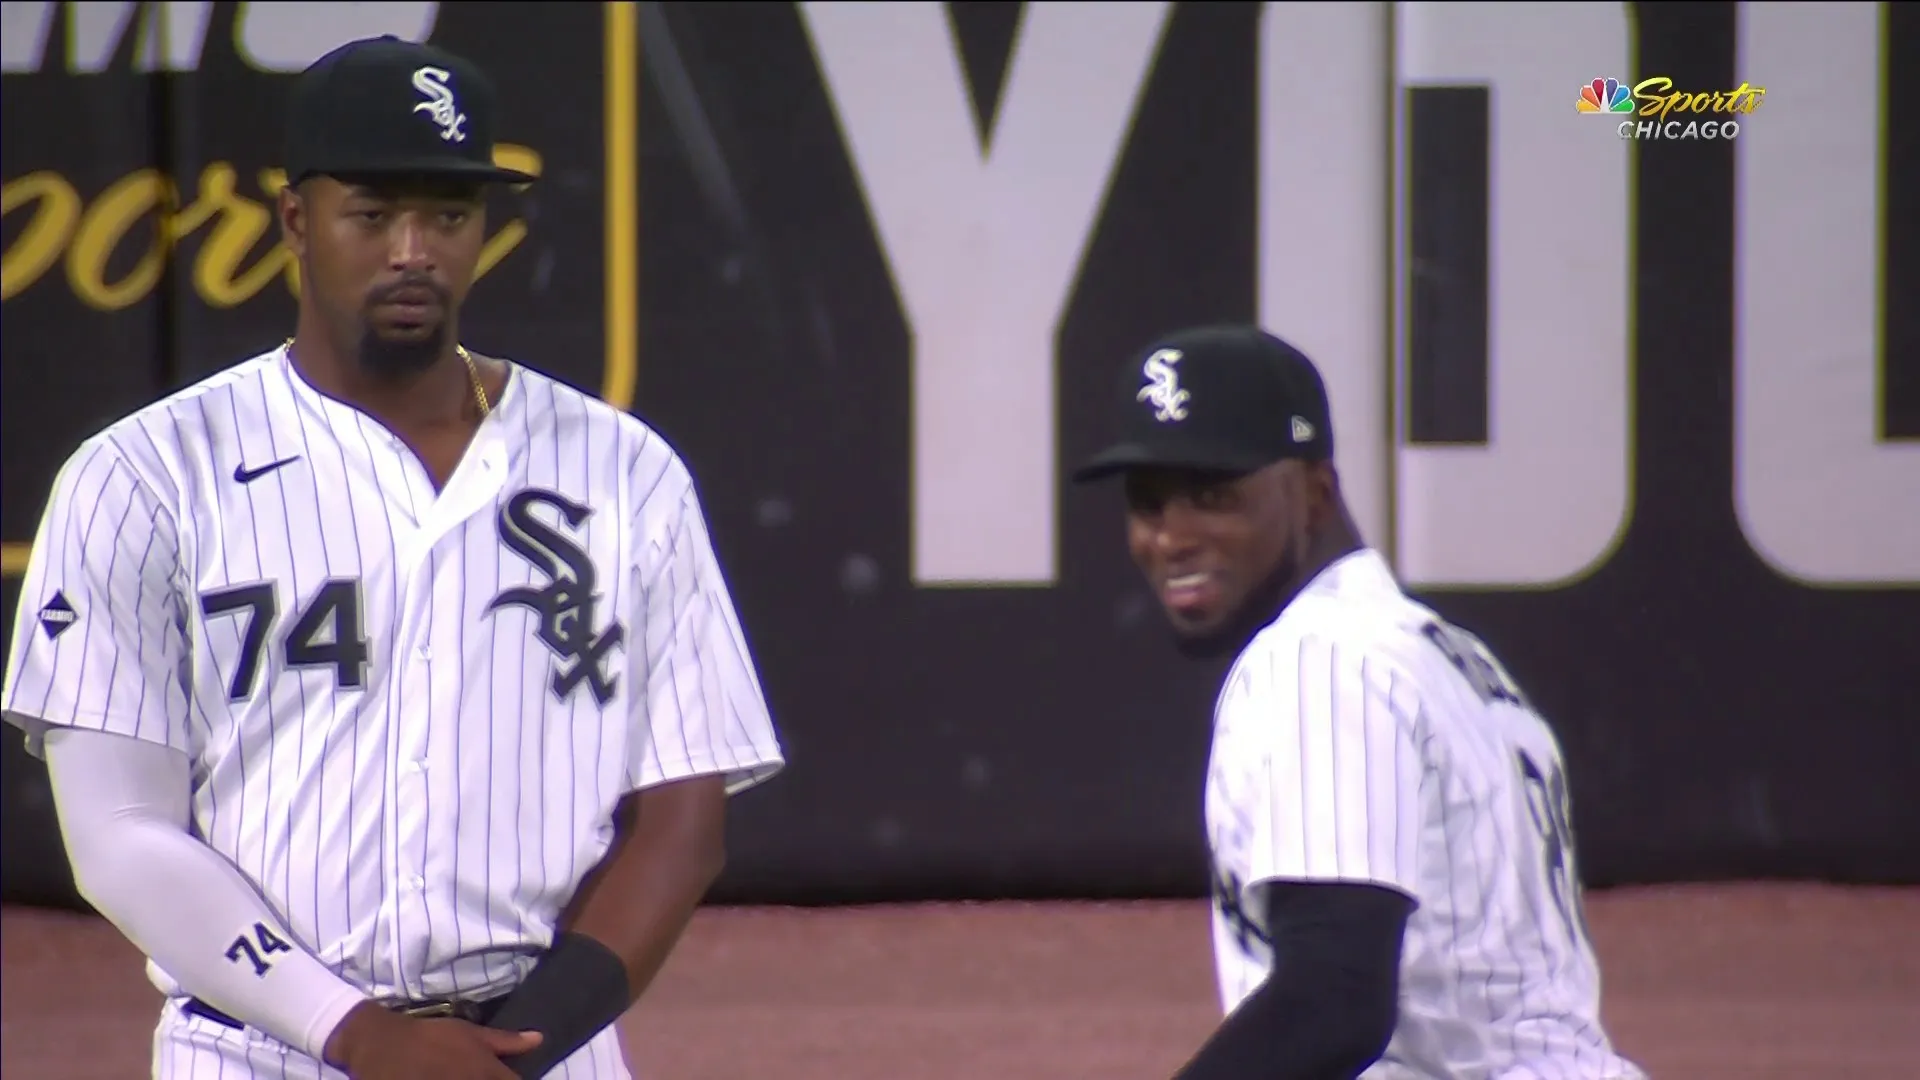 Luis Robert Jr. showing off humor, leadership for White Sox